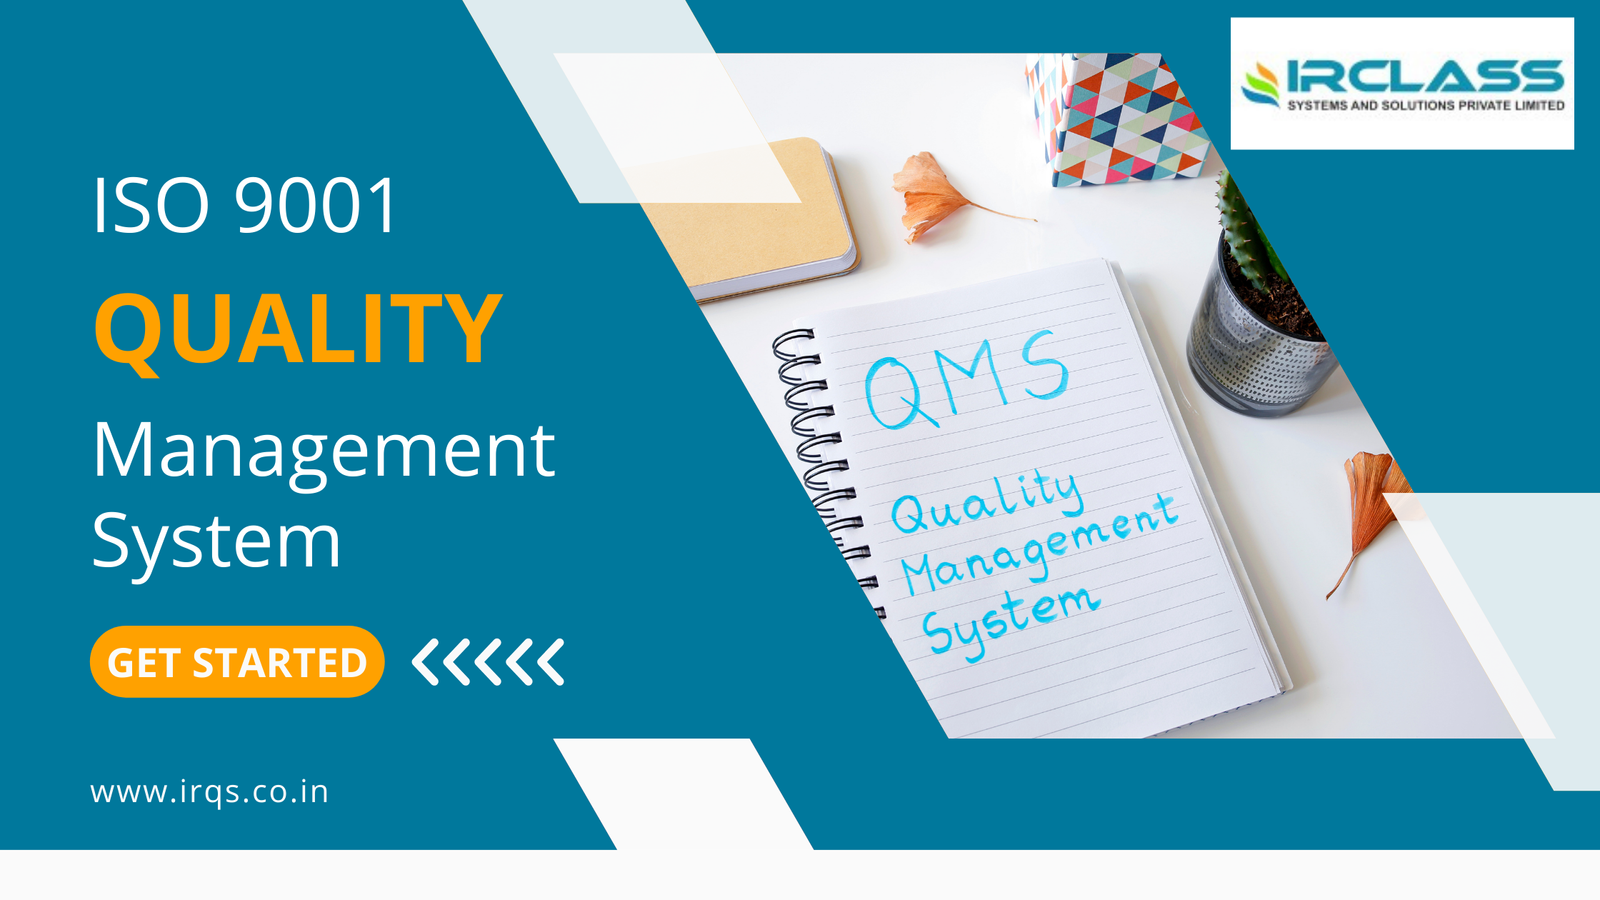 What is ISO 9001:2015 – Quality management systems?